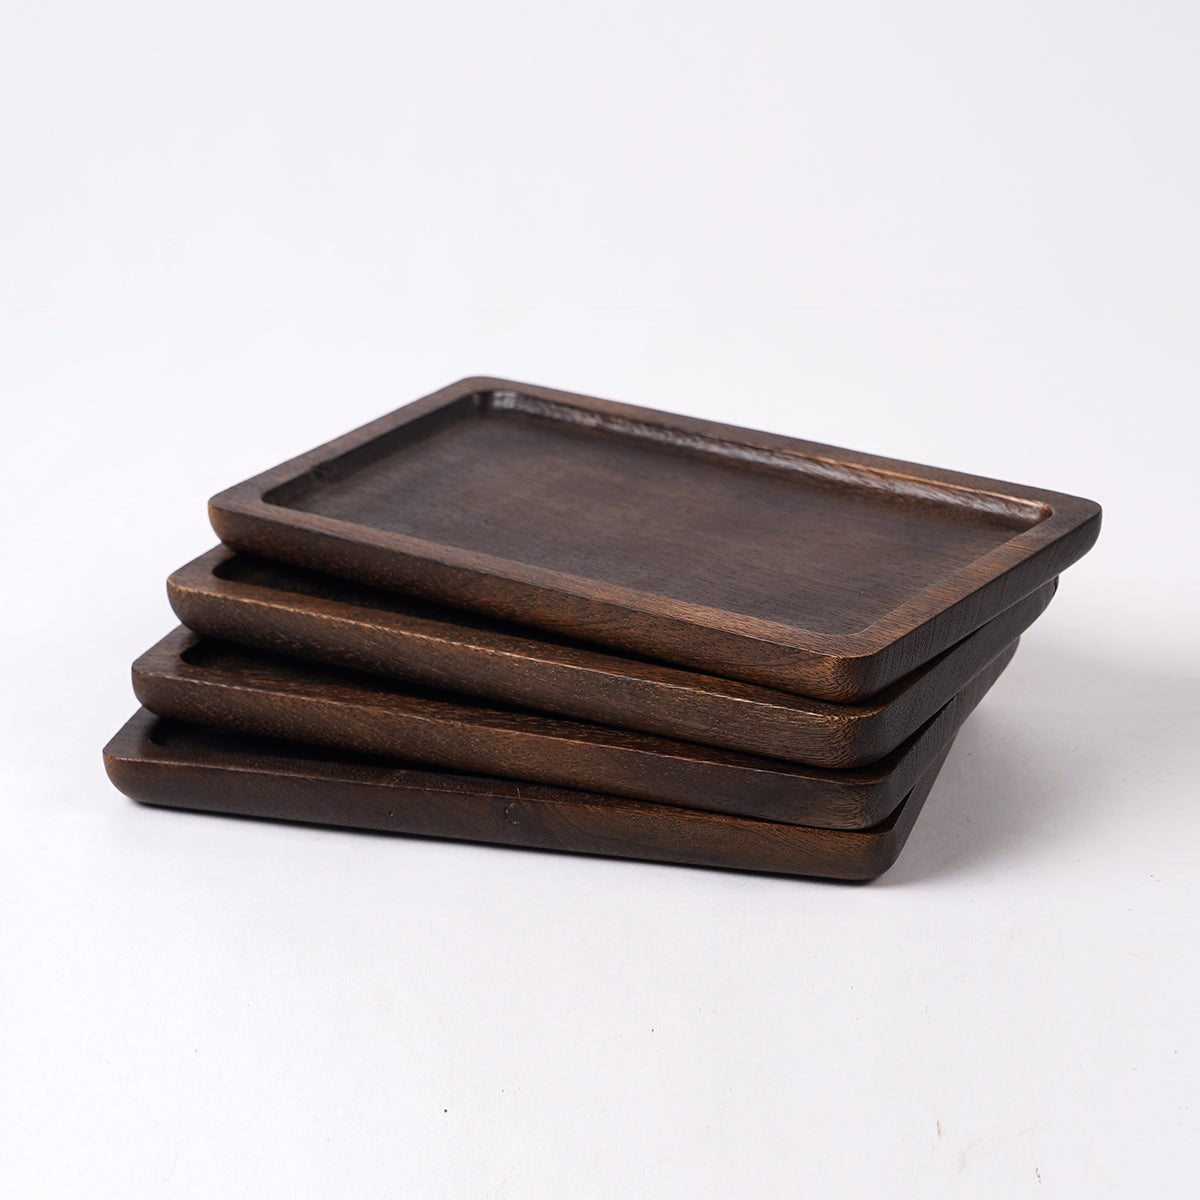 Wooden tray, dark brown, round edged rustic serving tray, farmhouse decor, 6X10 inches